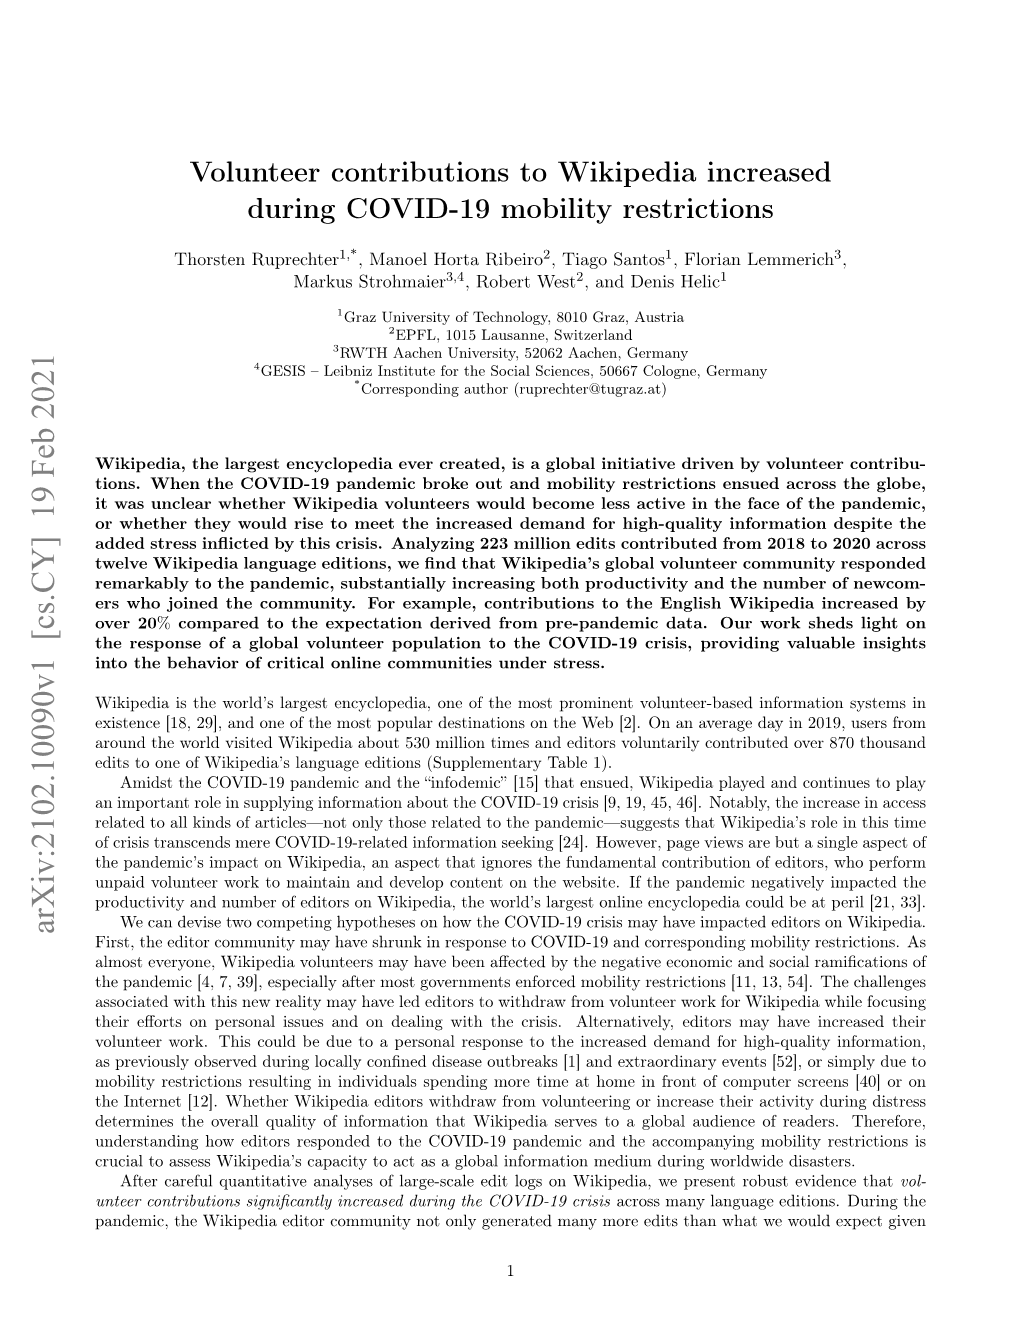 Volunteer Contributions to Wikipedia Increased During COVID-19 Mobility Restrictions